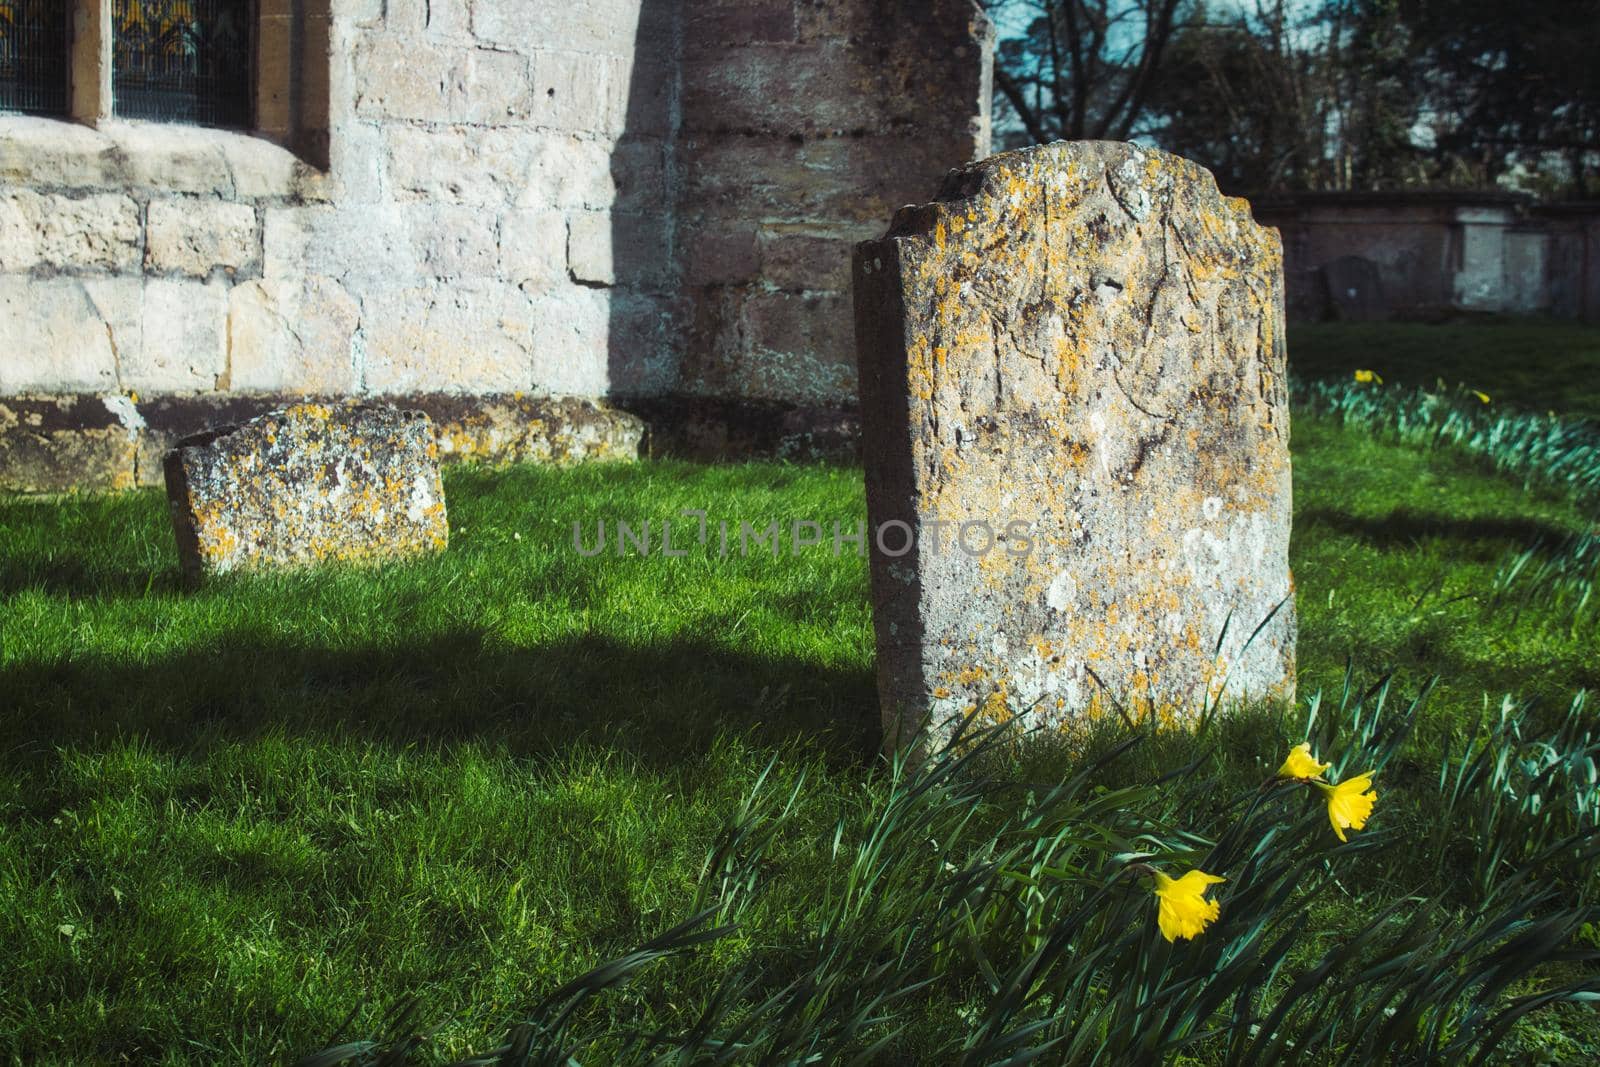 Blank gravestones in a typical churchyard in England